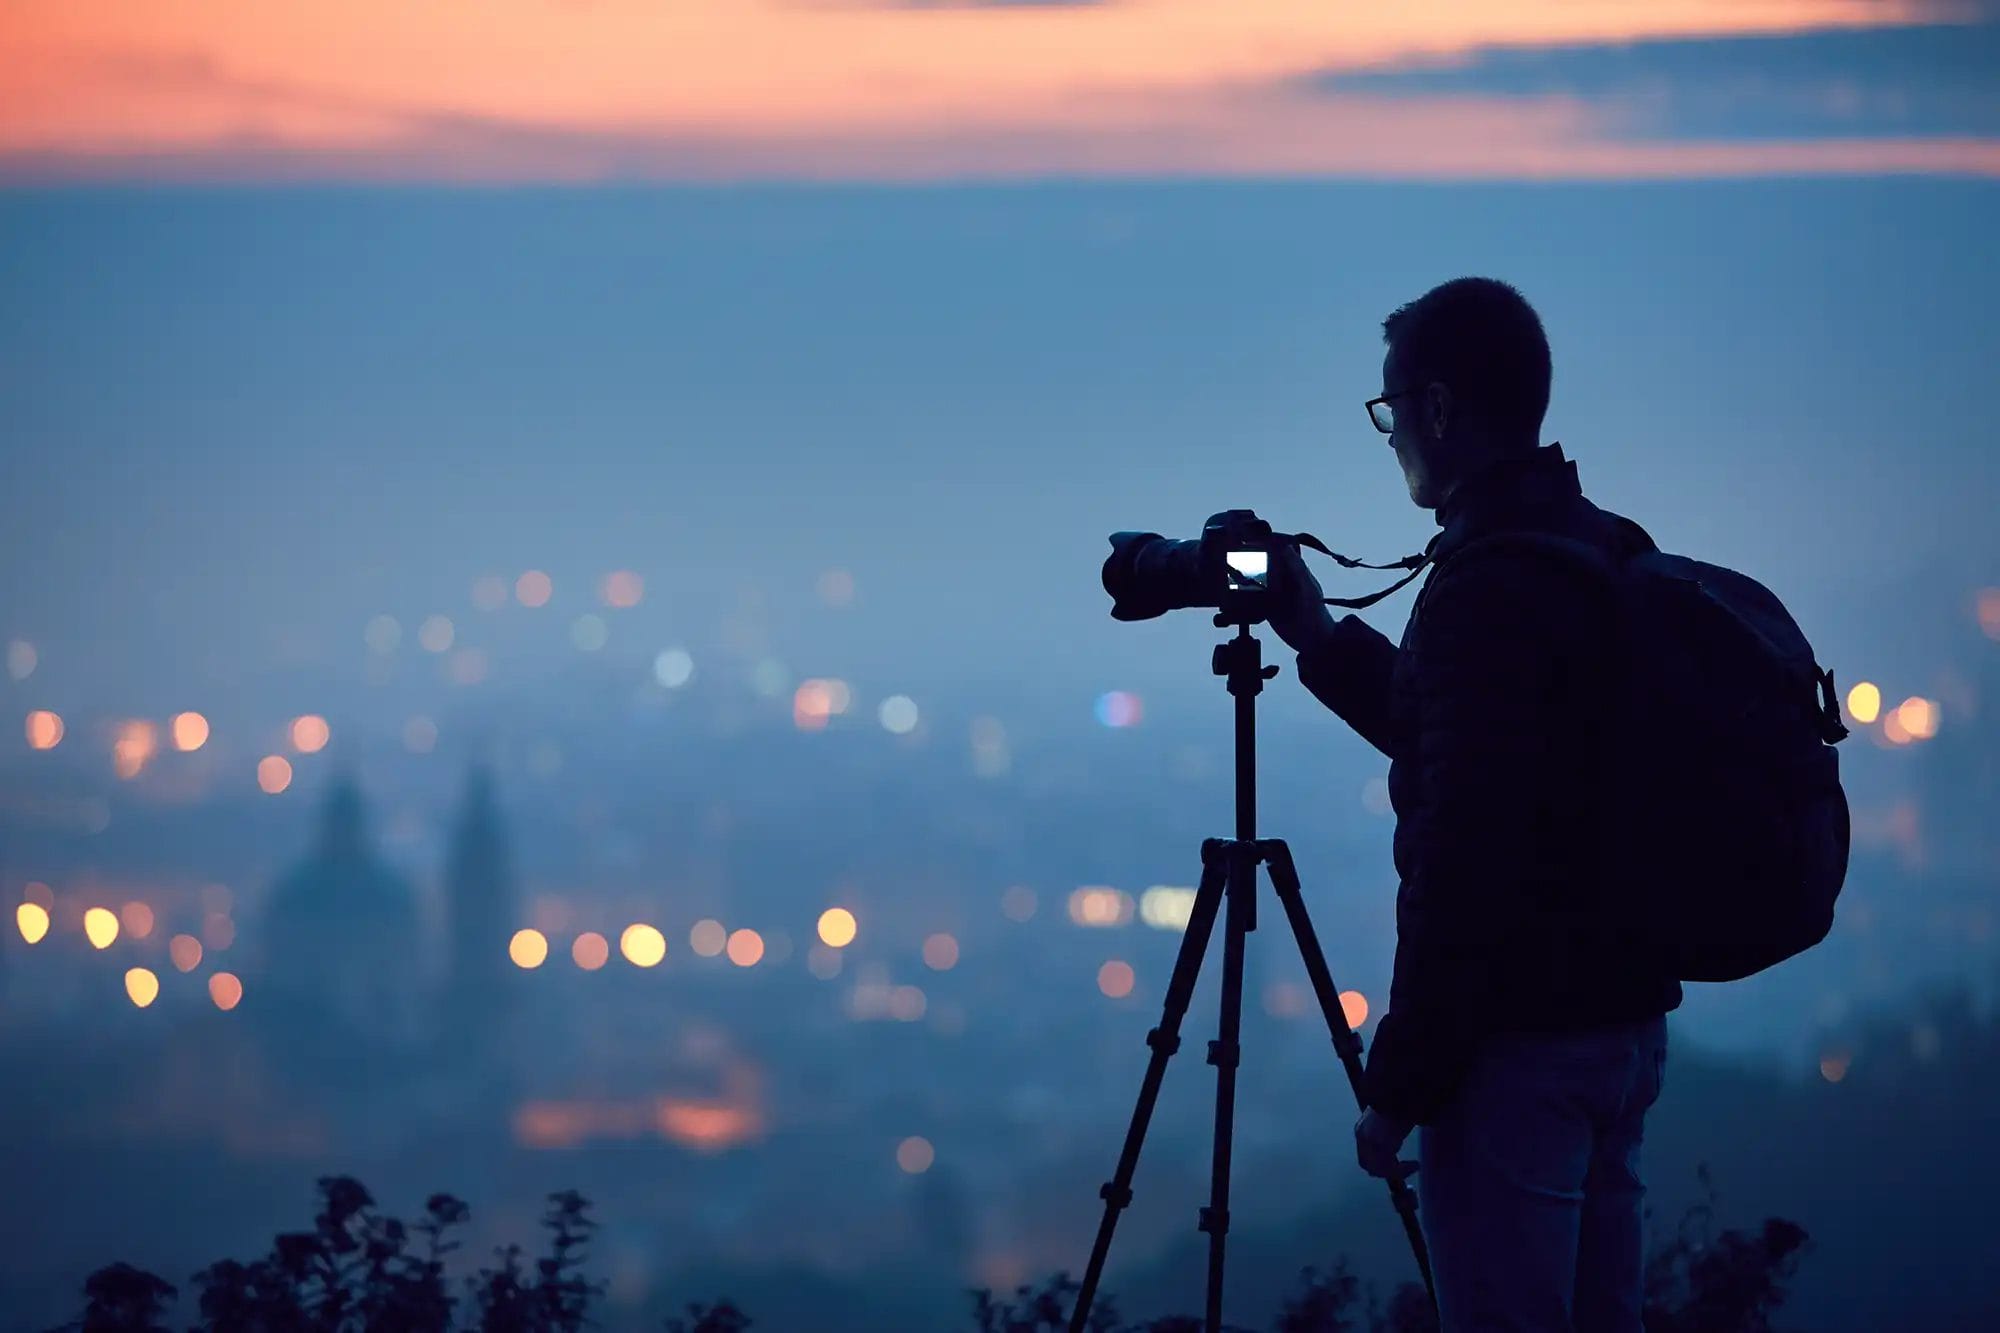 A silhouette of a photographer with a camera on tripod looking at a city in the distance at sunset